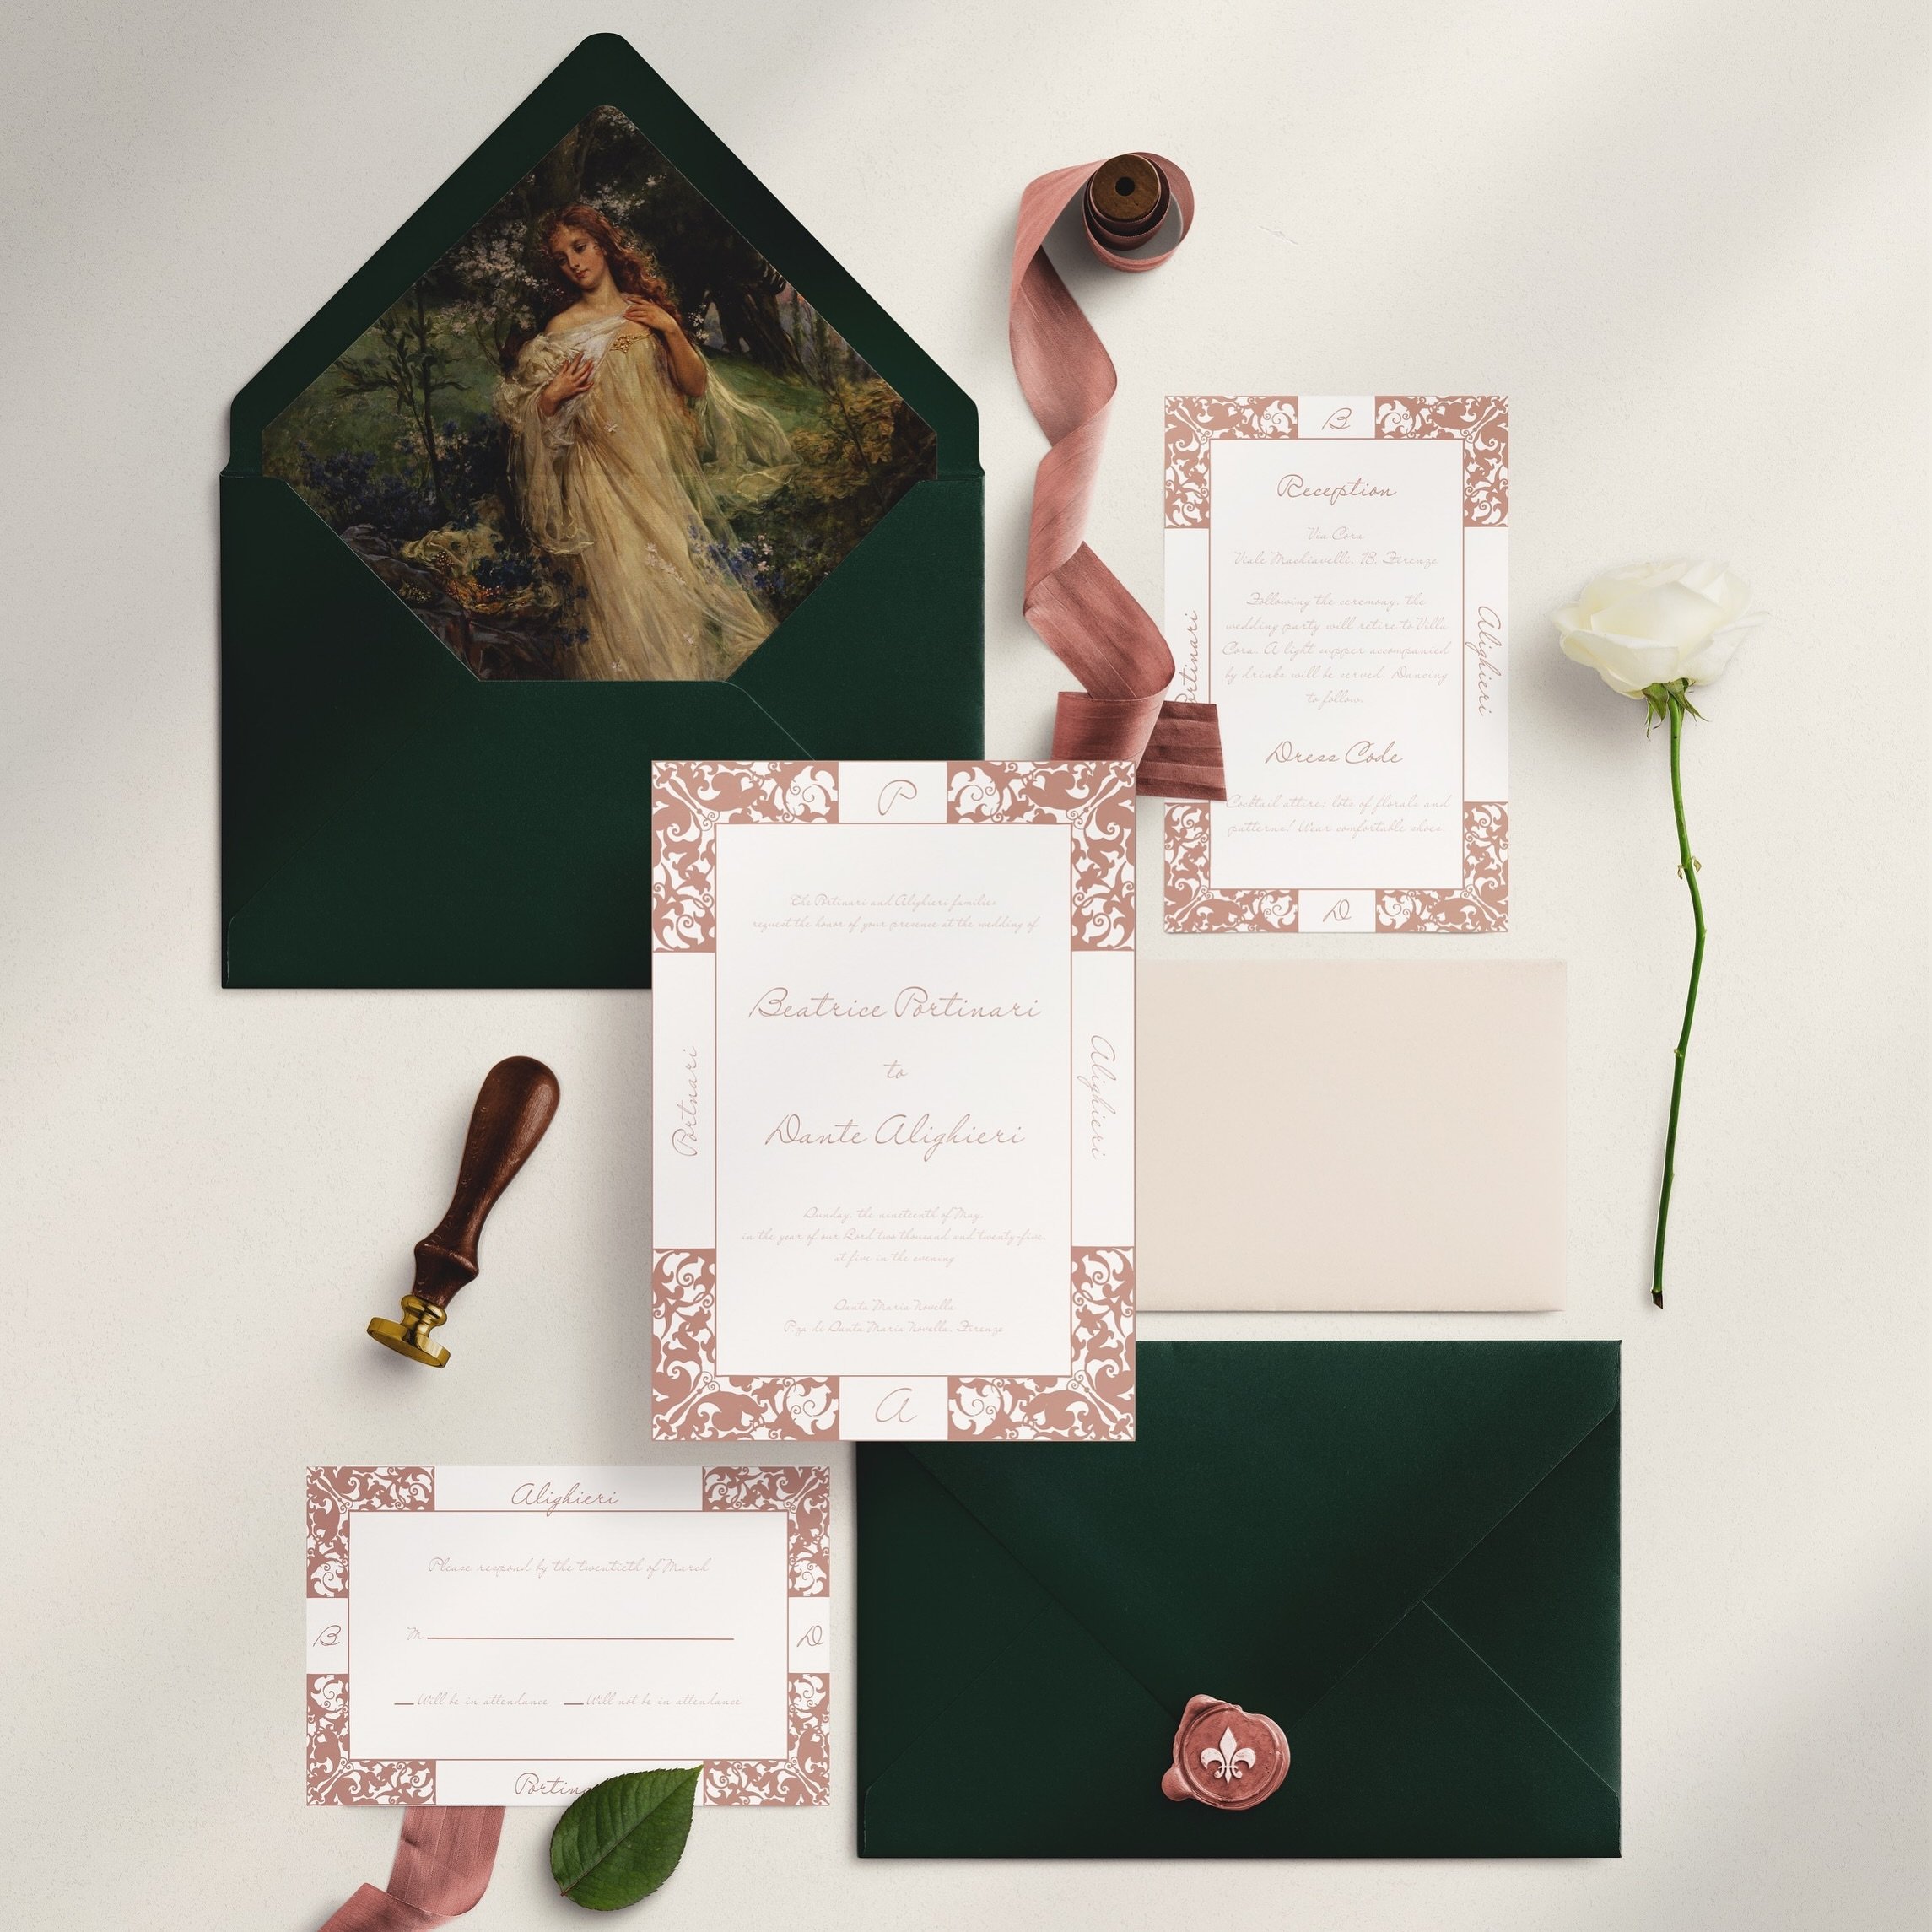 The Beatrice - inspired by a 16th century Italian design &amp; named for Beatrice from Dante&rsquo;s Inferno. 💌 Had so much fun designing this suite!

#wedding #weddingday #weddingstationery #design #invitation #invitations #paperie #weddinginvitati